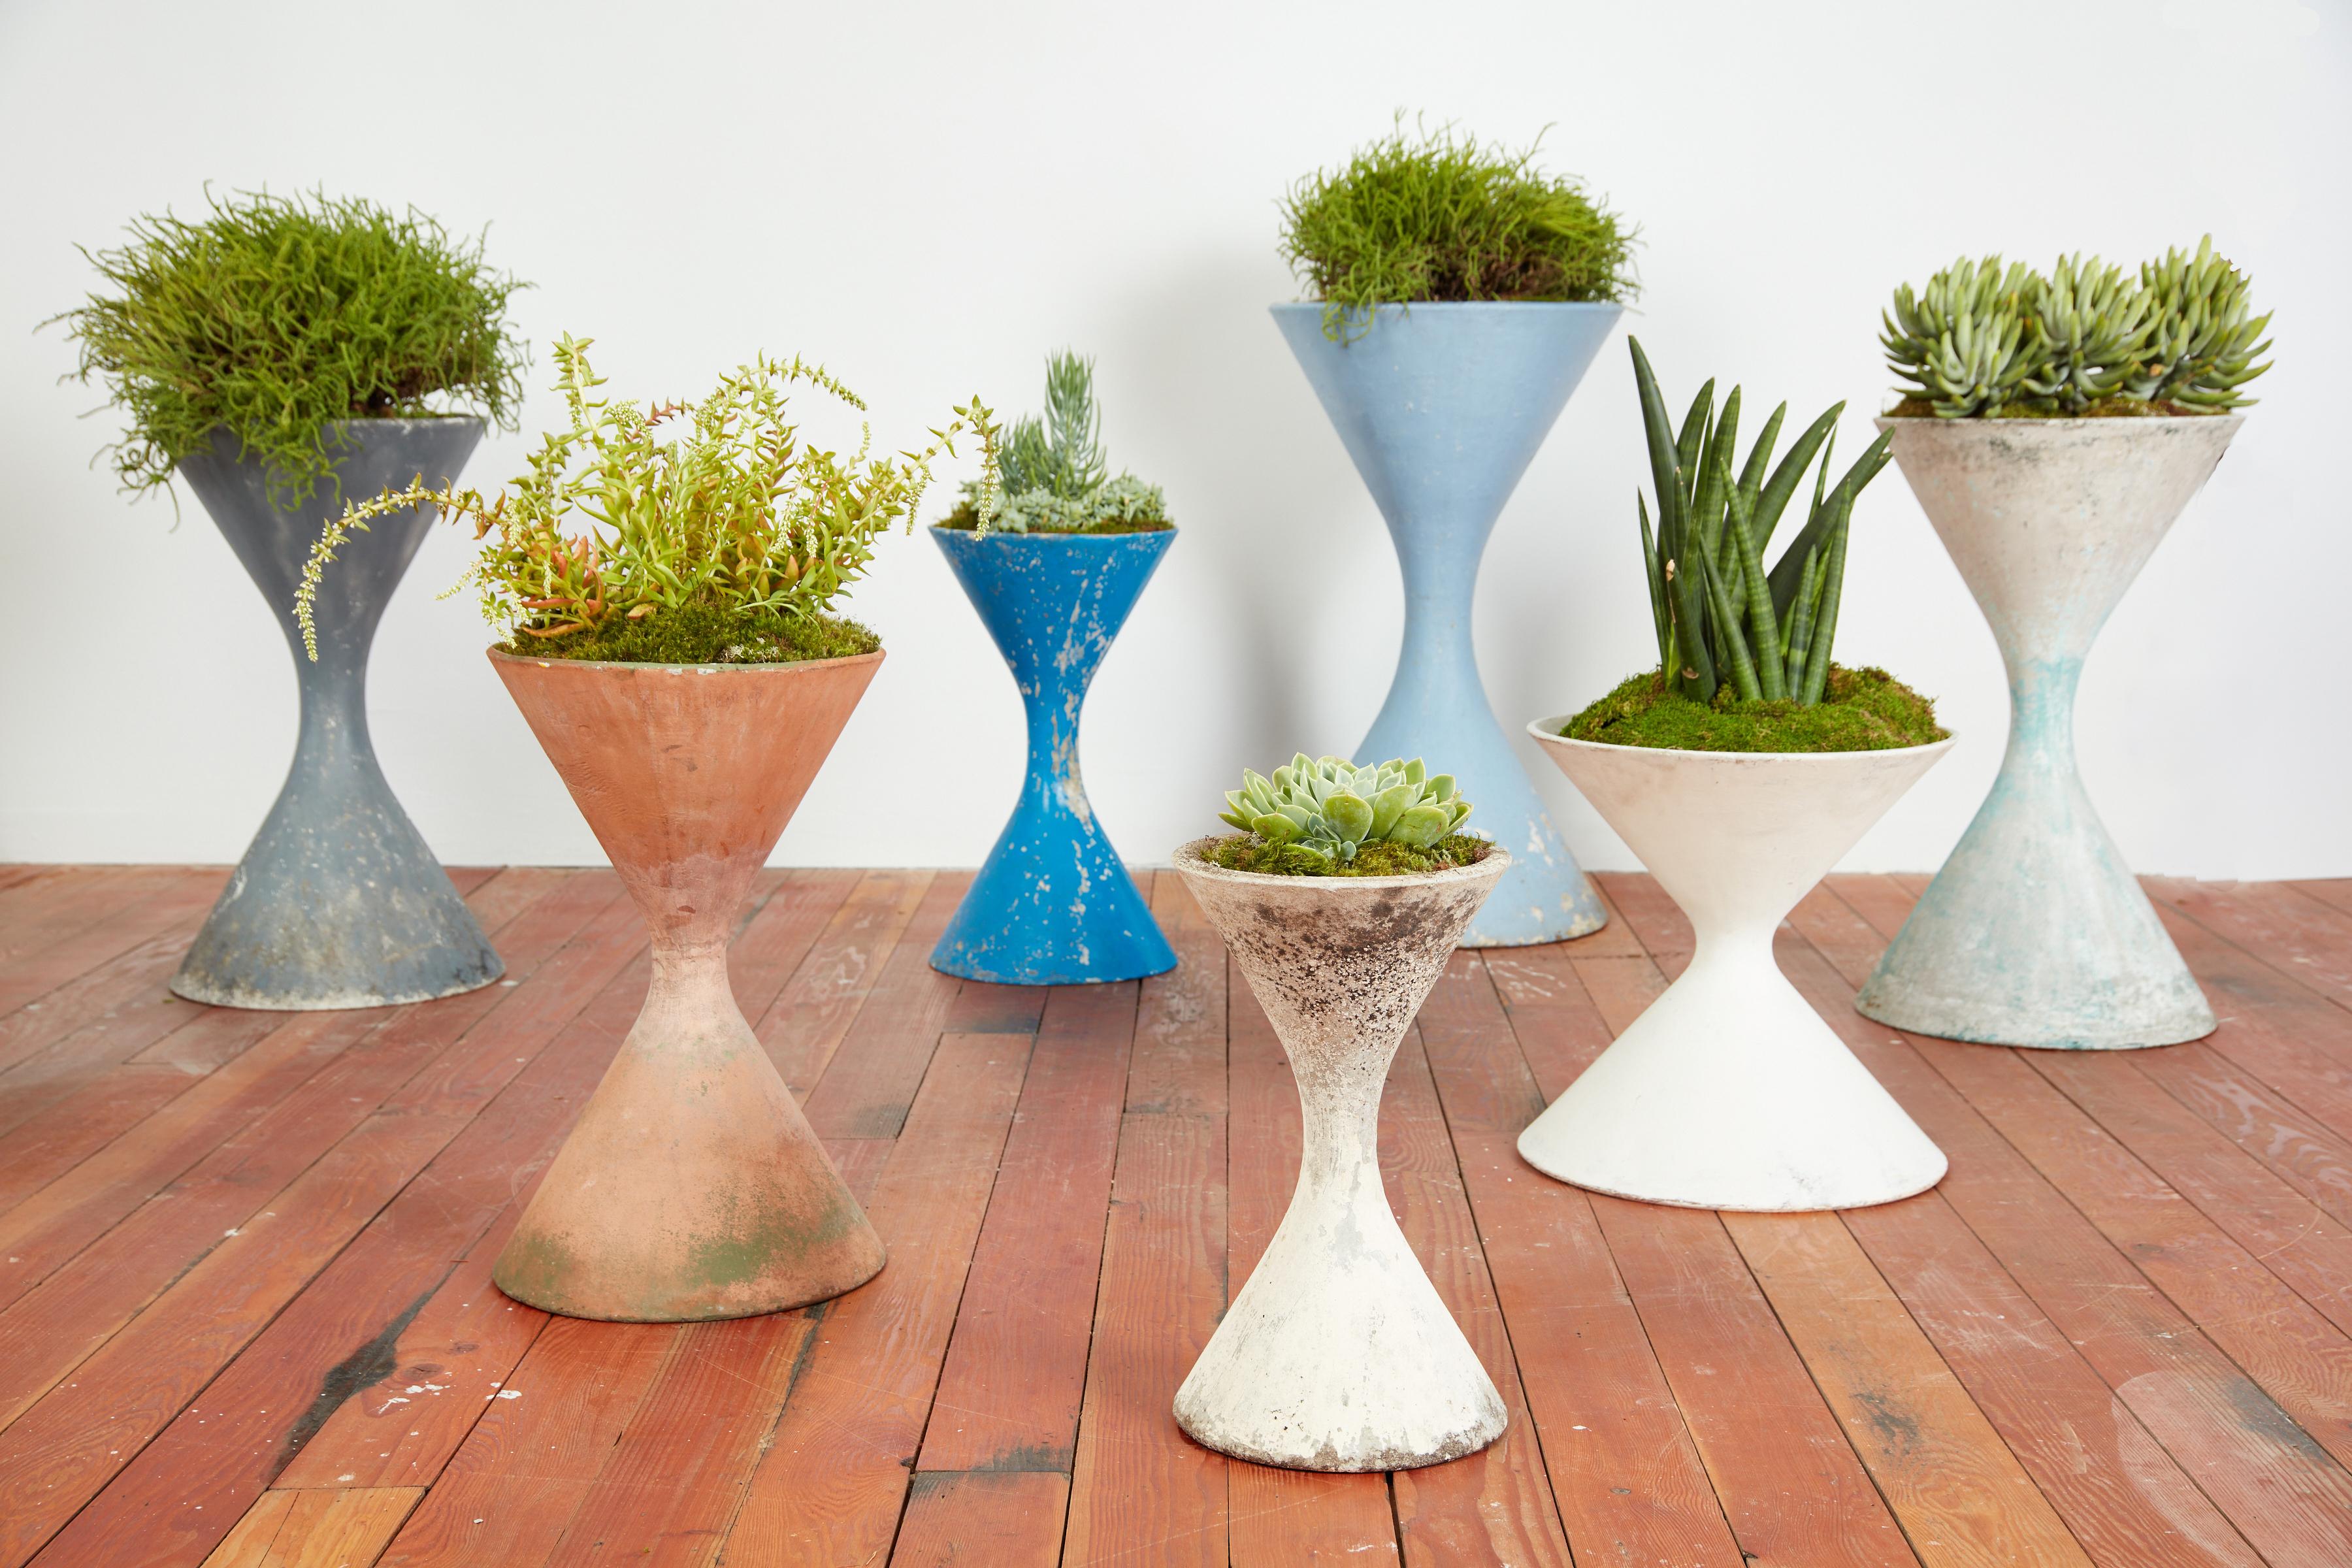 Wonderful collection of concrete hourglass planters by the Swiss Architect, Willy Guhl. Great age, patina and coloring. Iconic sculptural planter or garden object. This listing is for a 35.5